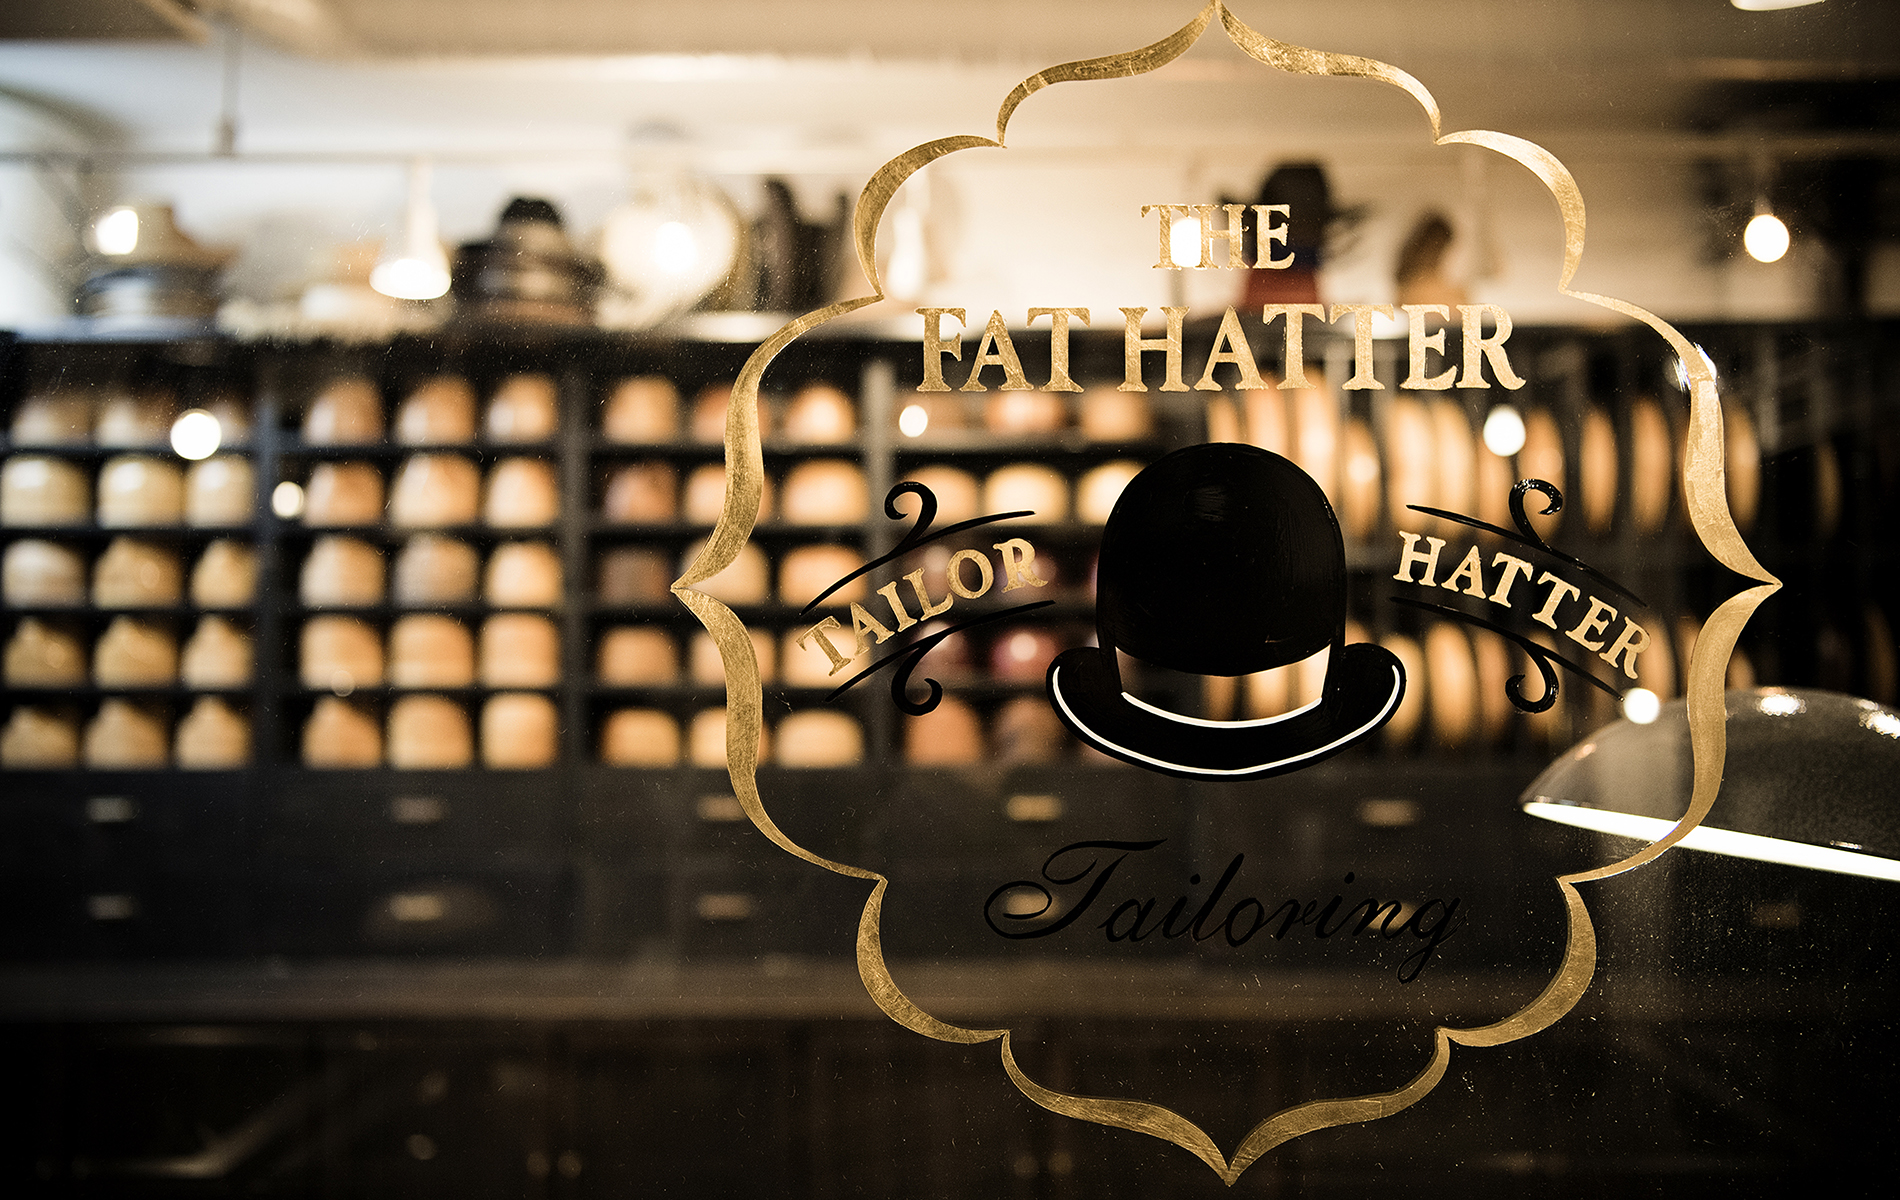 THE FAT HATTER Official Website